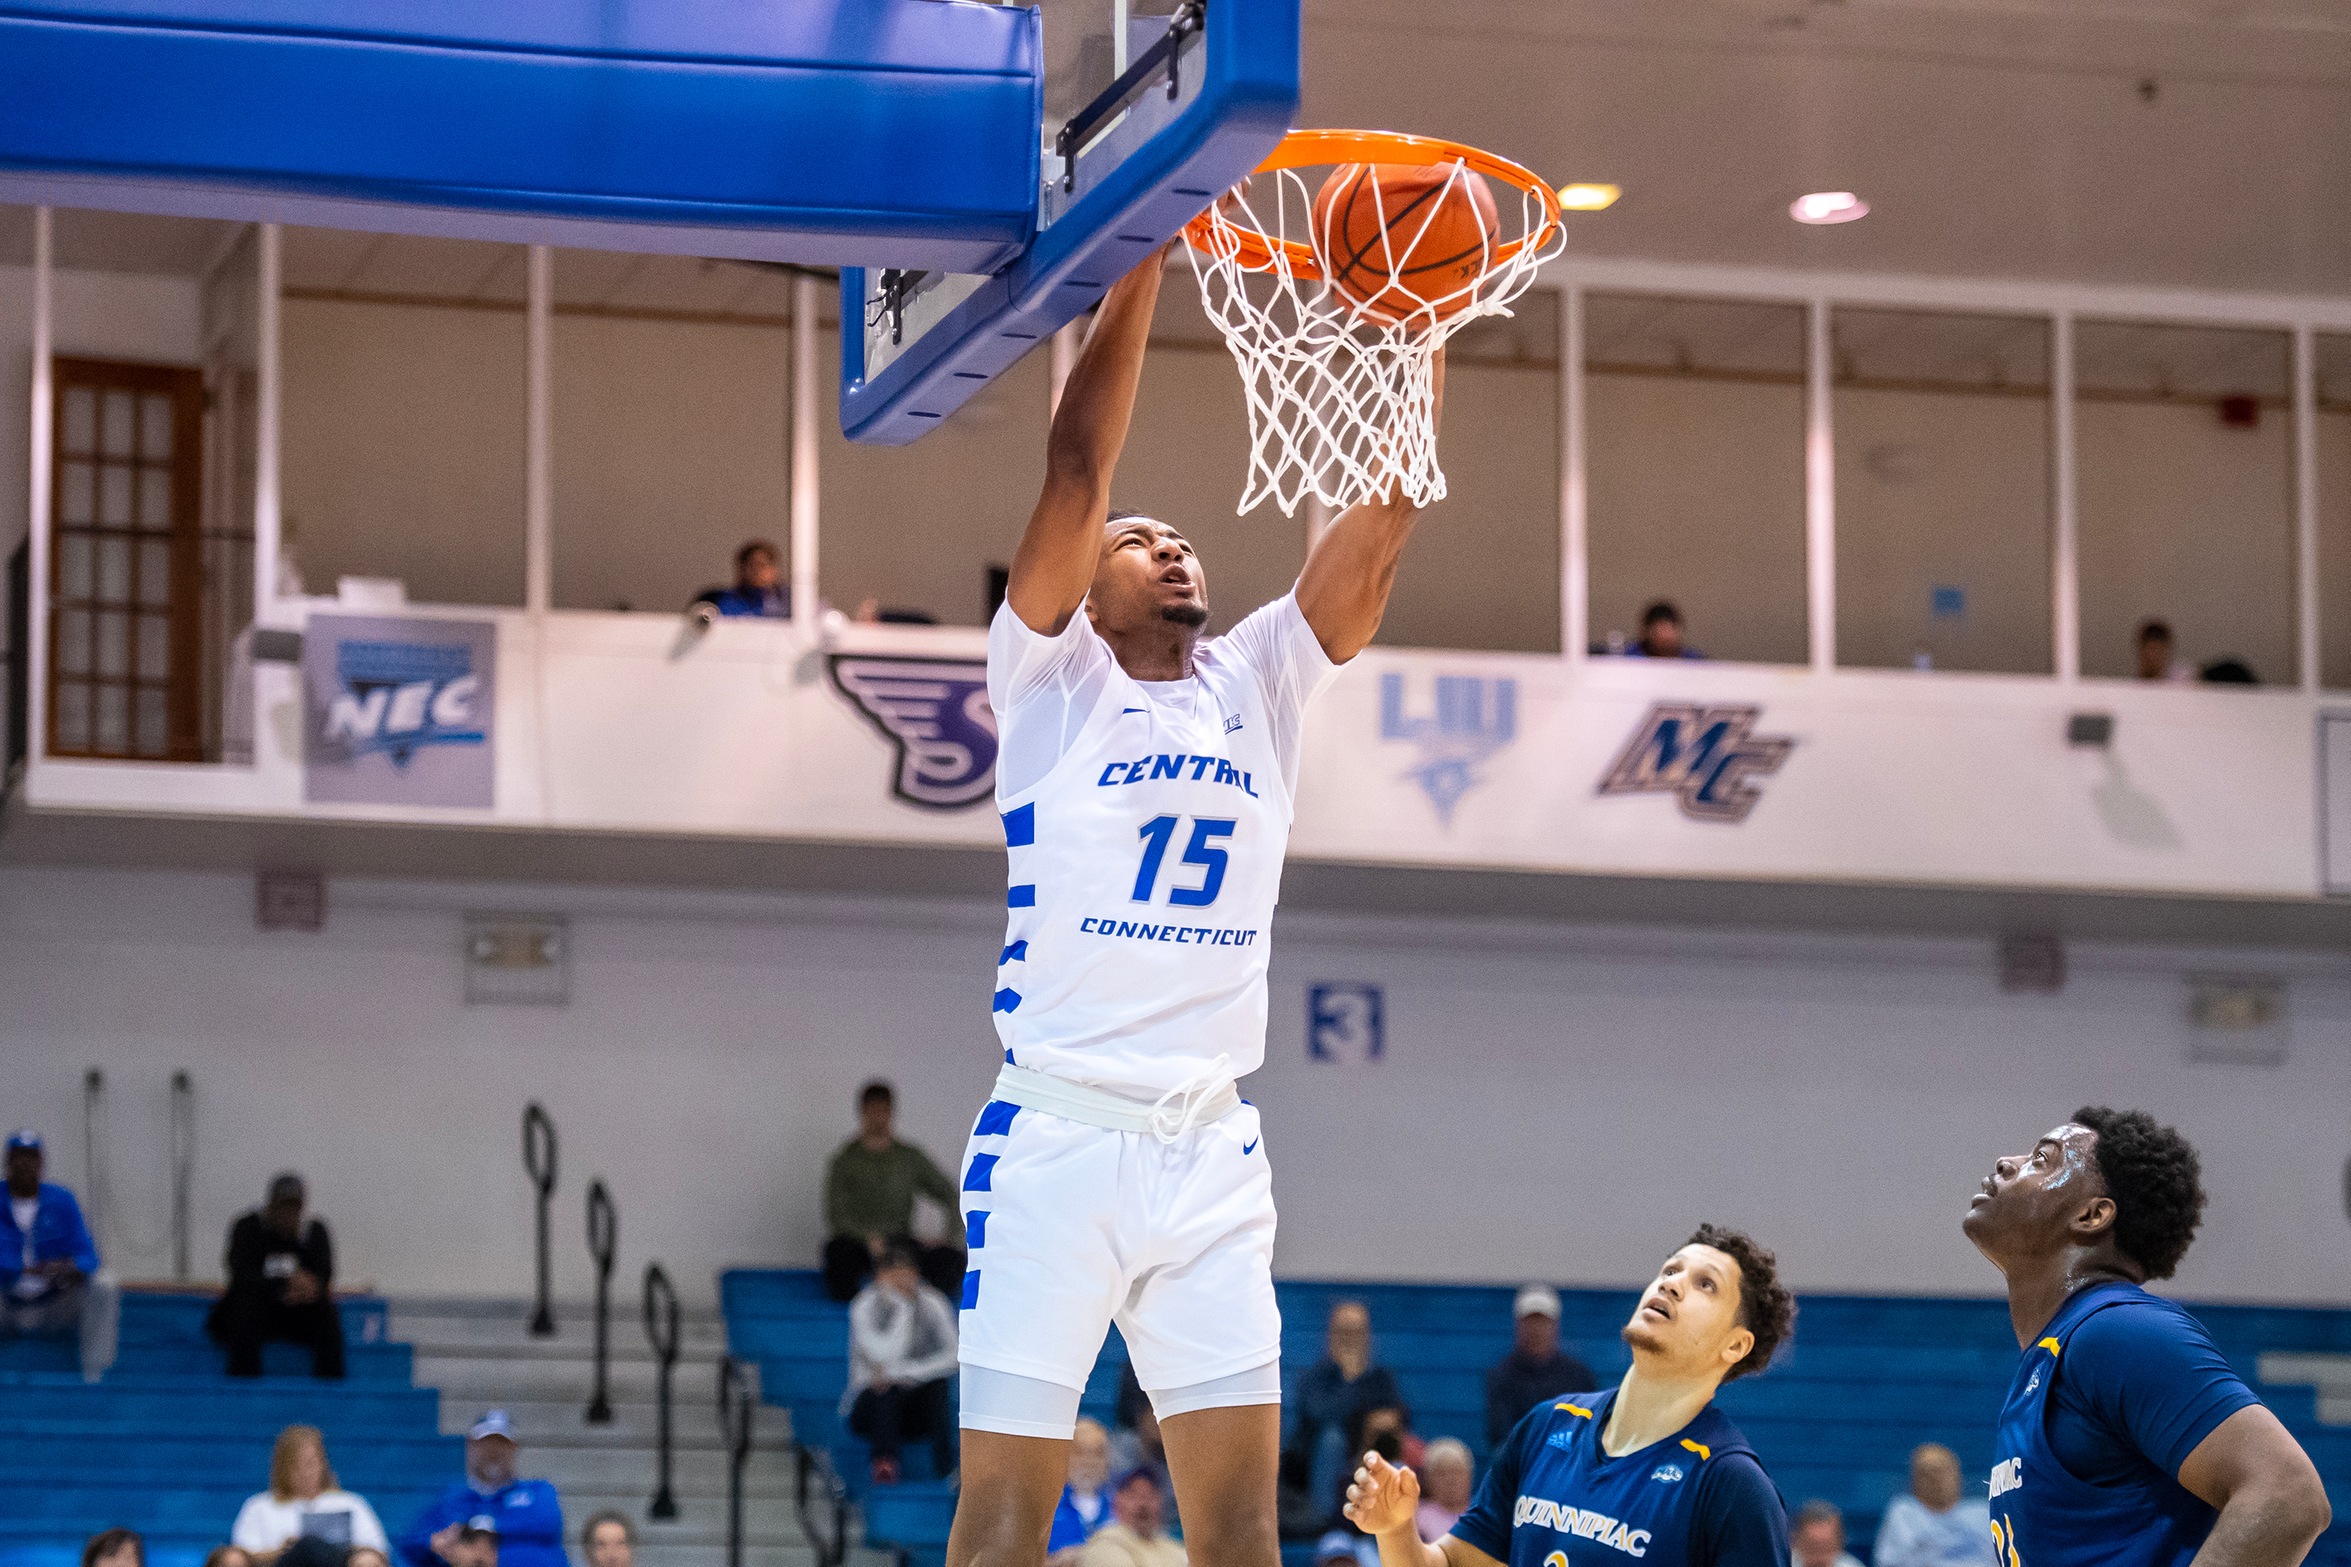 Jayden Brown had 10 points and 7 rebounds on Thursday (Steve McLaughlin Photography)